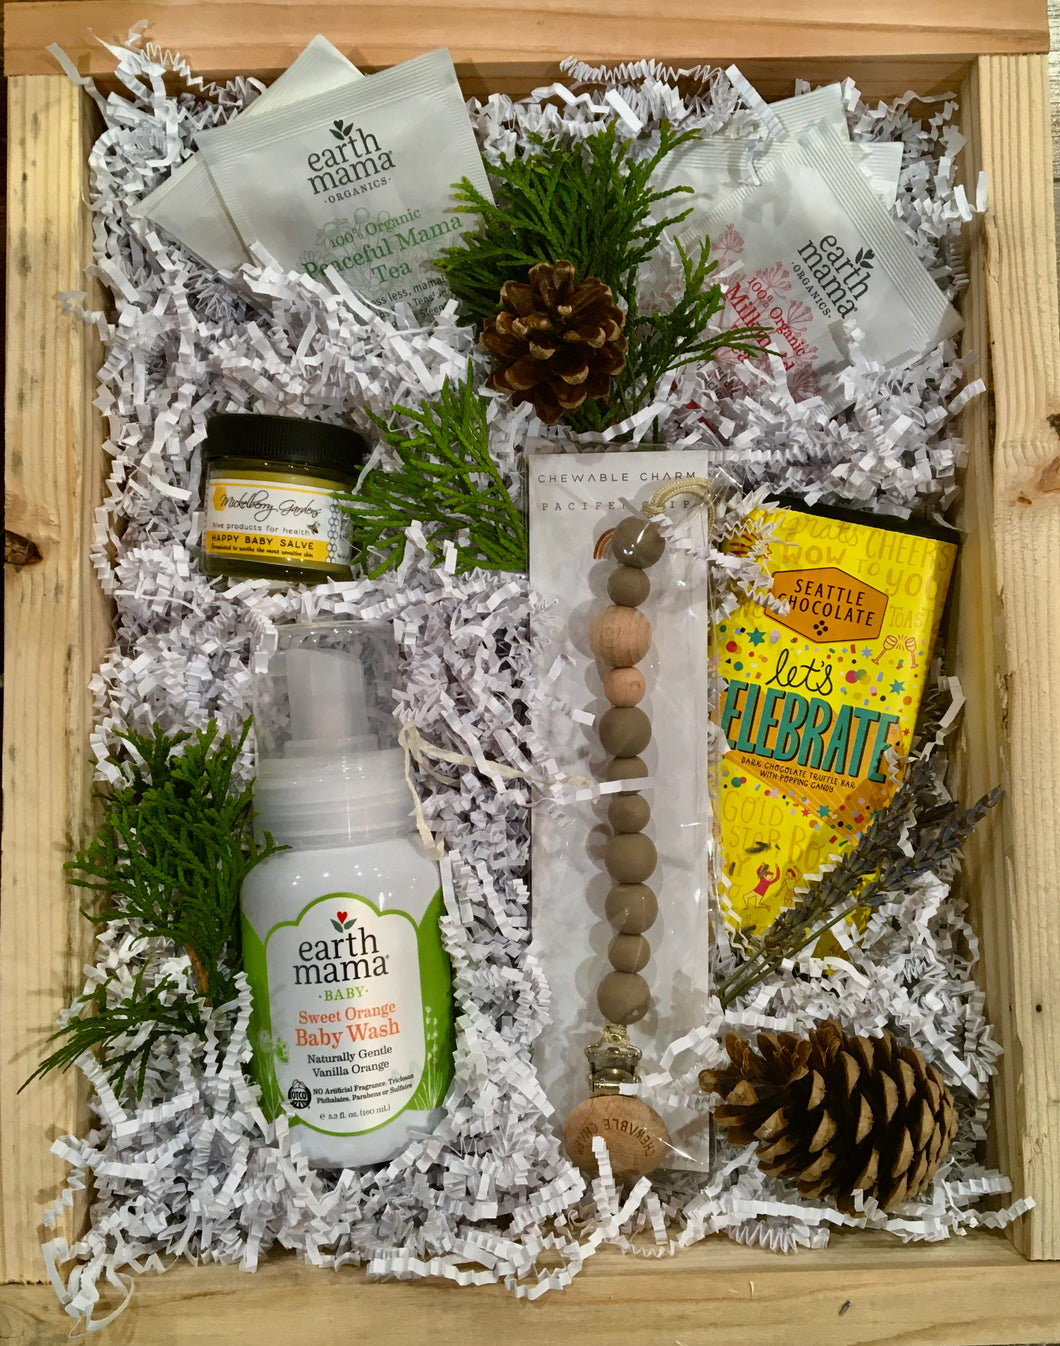 Welcome baby with this thoughtful gift box/basket - Organic baby wash from Earth Momma, Chewable charm teething pacifier clip, Mickleberry Gardens happy baby  sauce, Assorted wellness teas  and a  chocolate truffle bar that says 